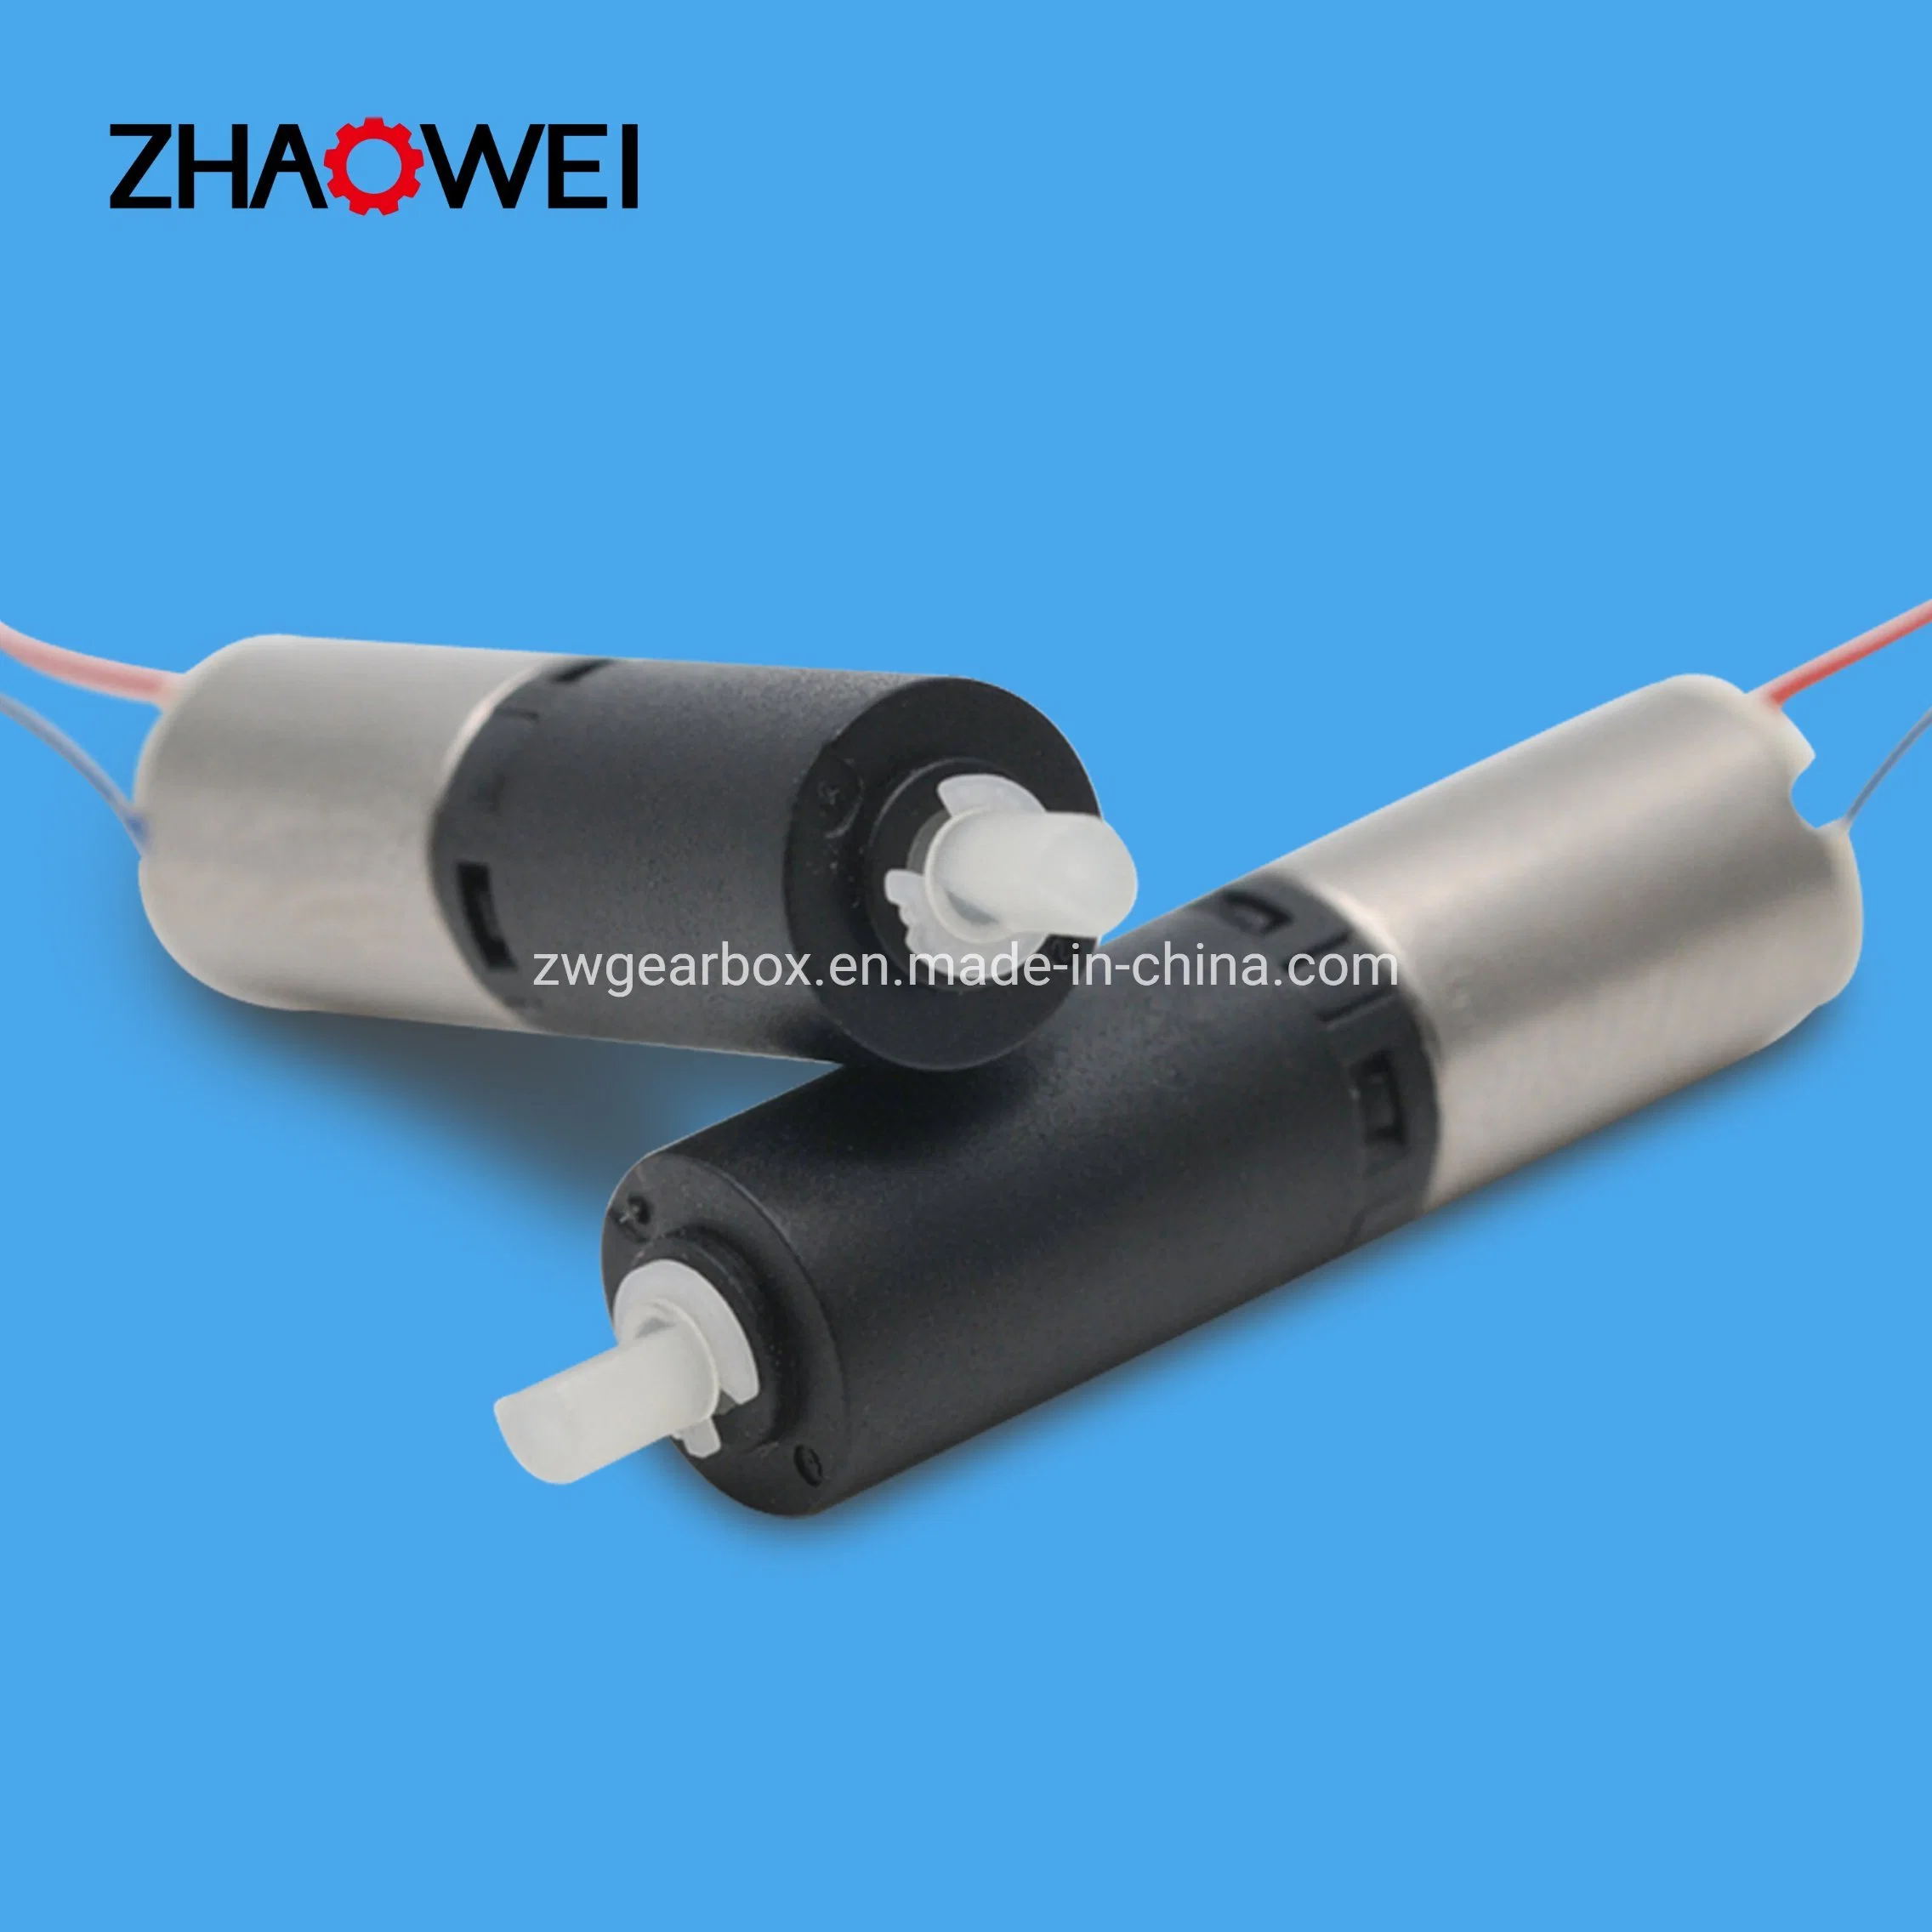 6mm Small Stepper Gear Motor for Mobile Phone Camera Gearbox